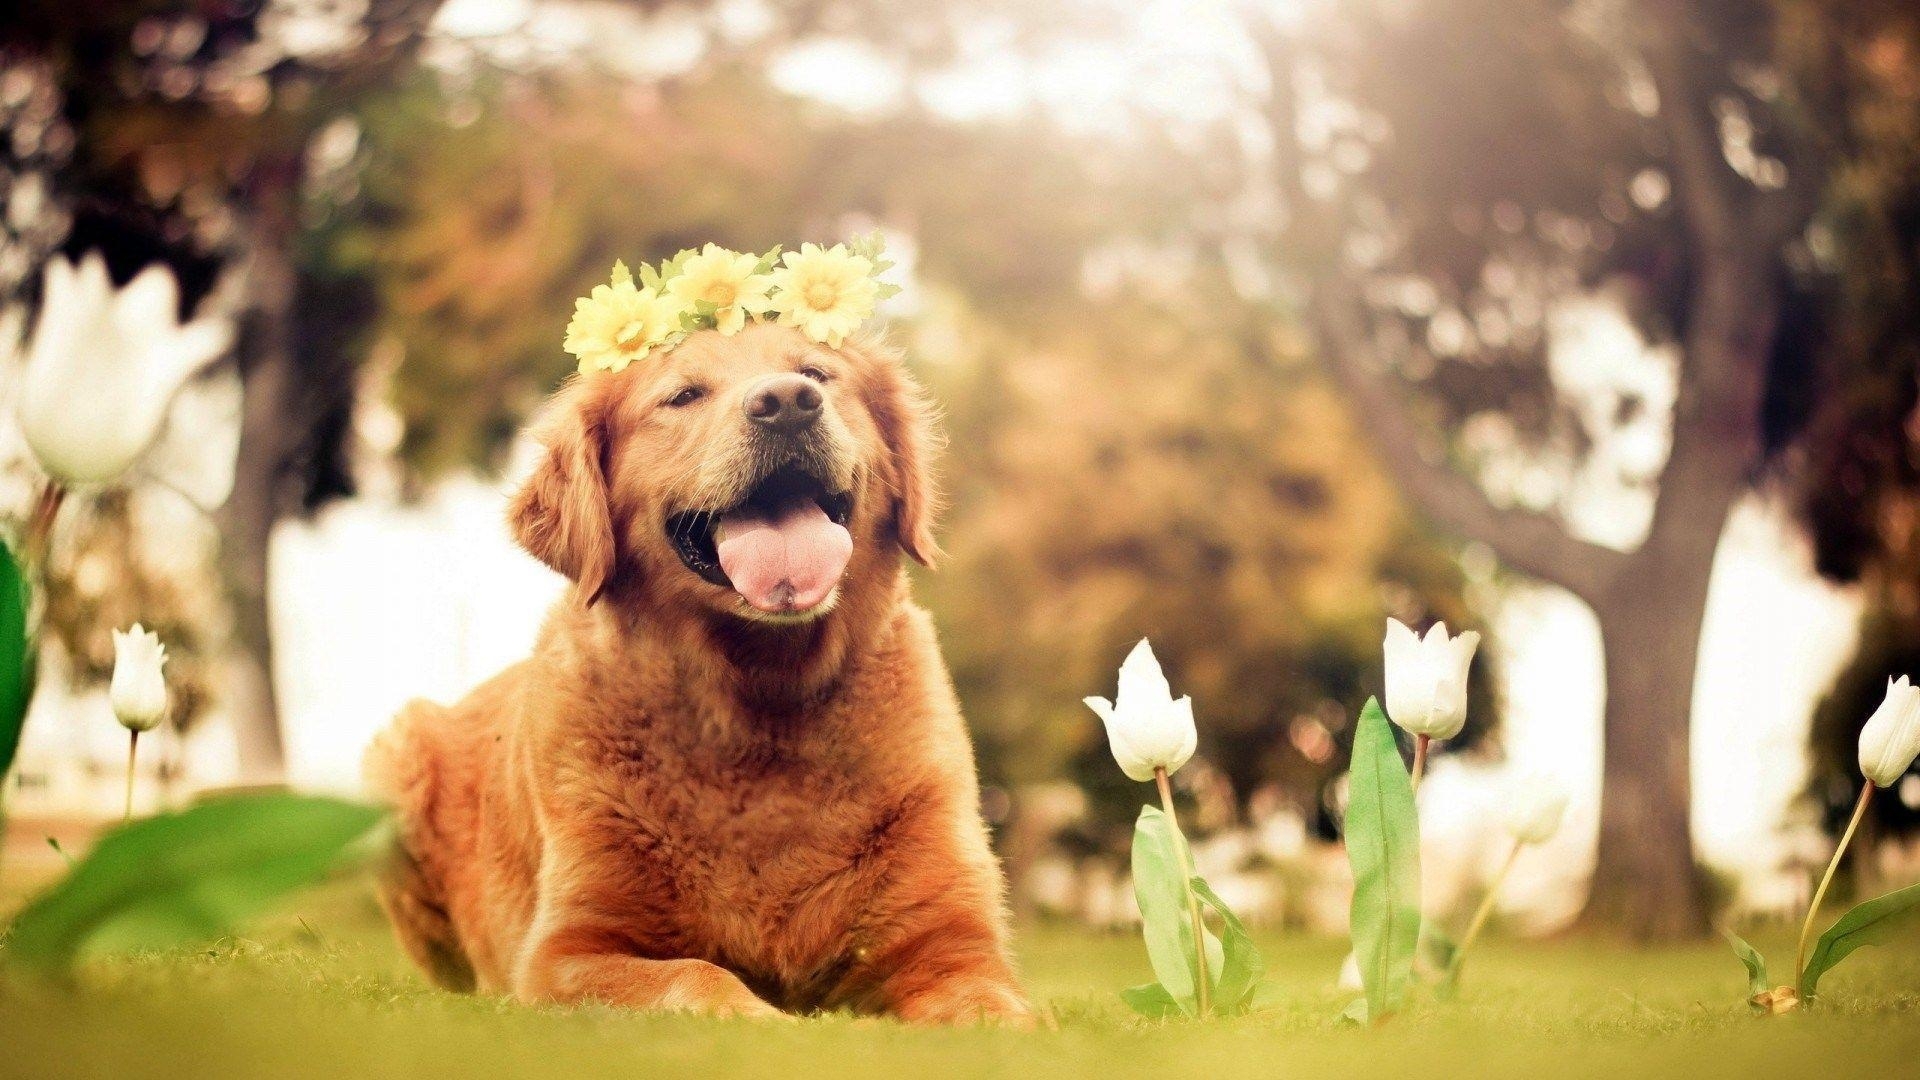 10 Latest Dog Backgrounds For Computer FULL HD 1080p For PC Background